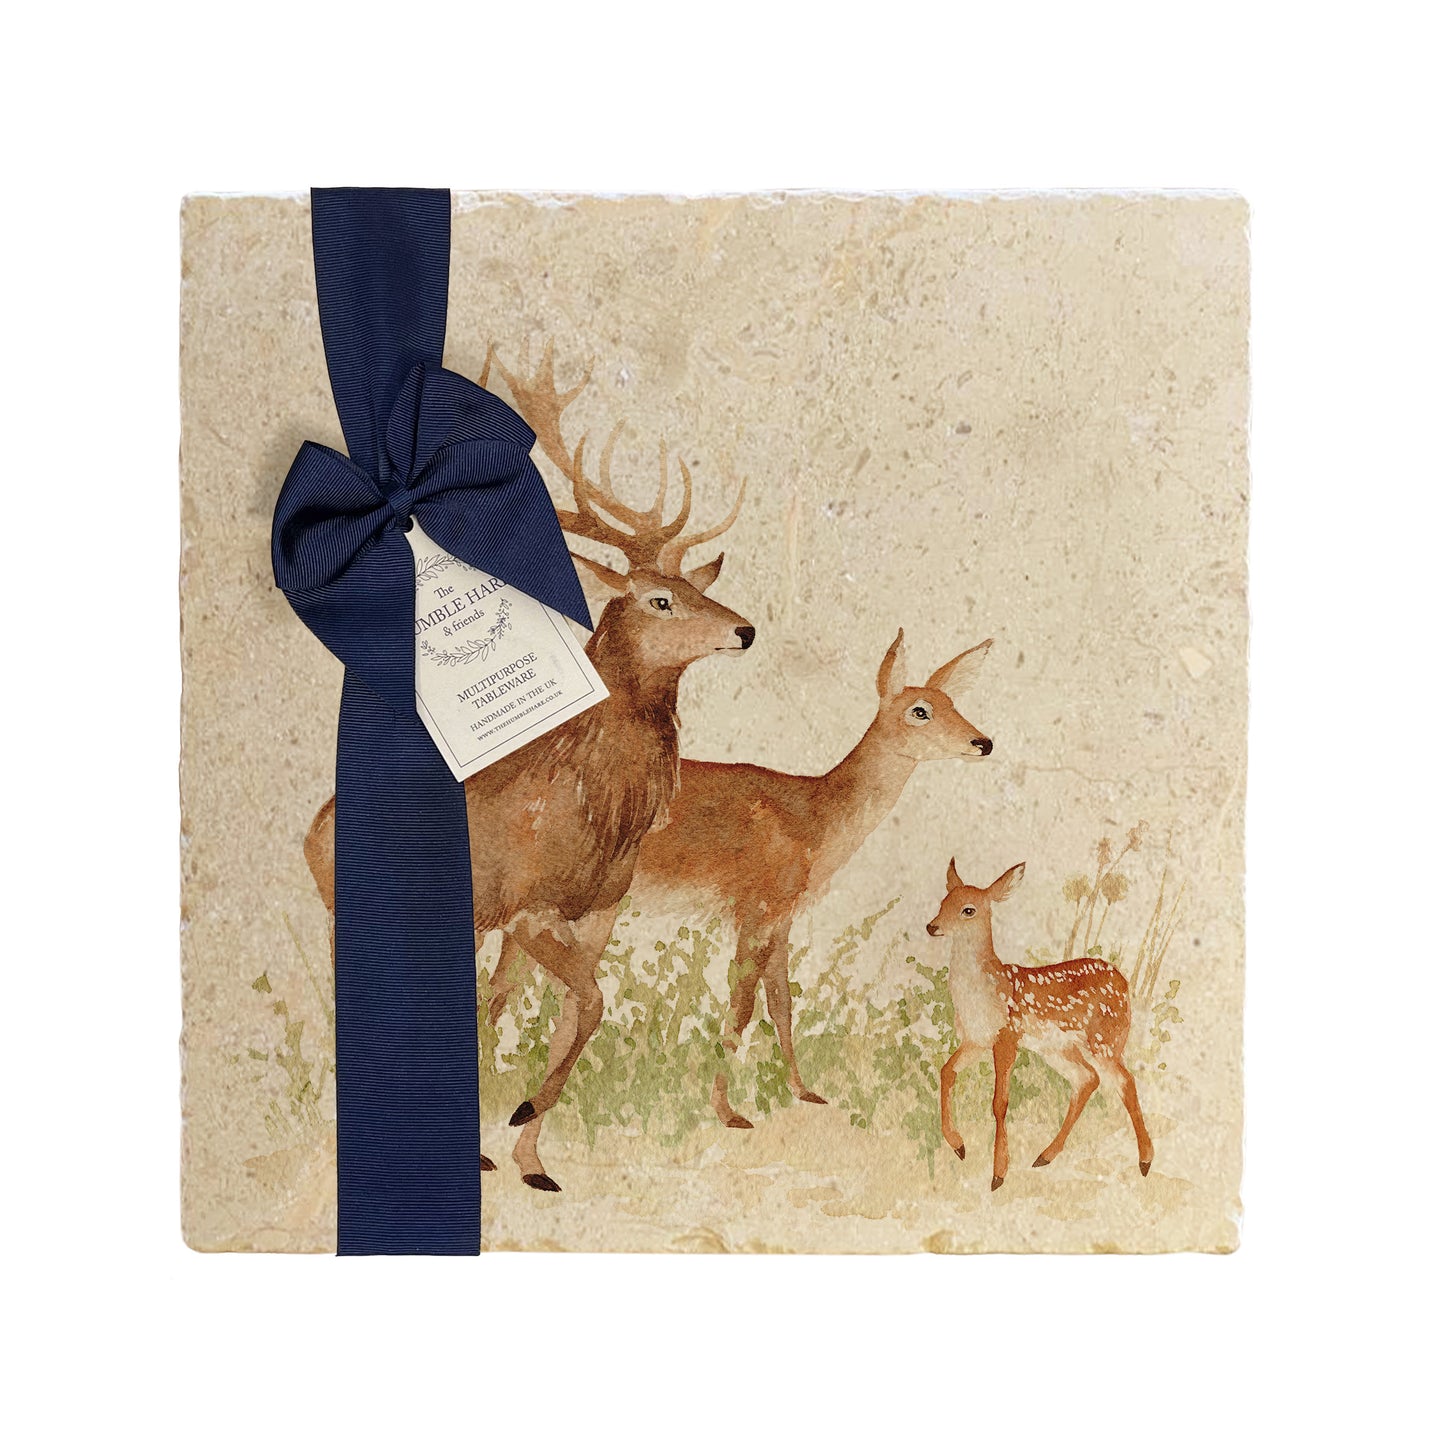 A multipurpose marble platter with a watercolour design featuring a family of red deer, packaged with a luxurious dark blue bow and branded gift tag.